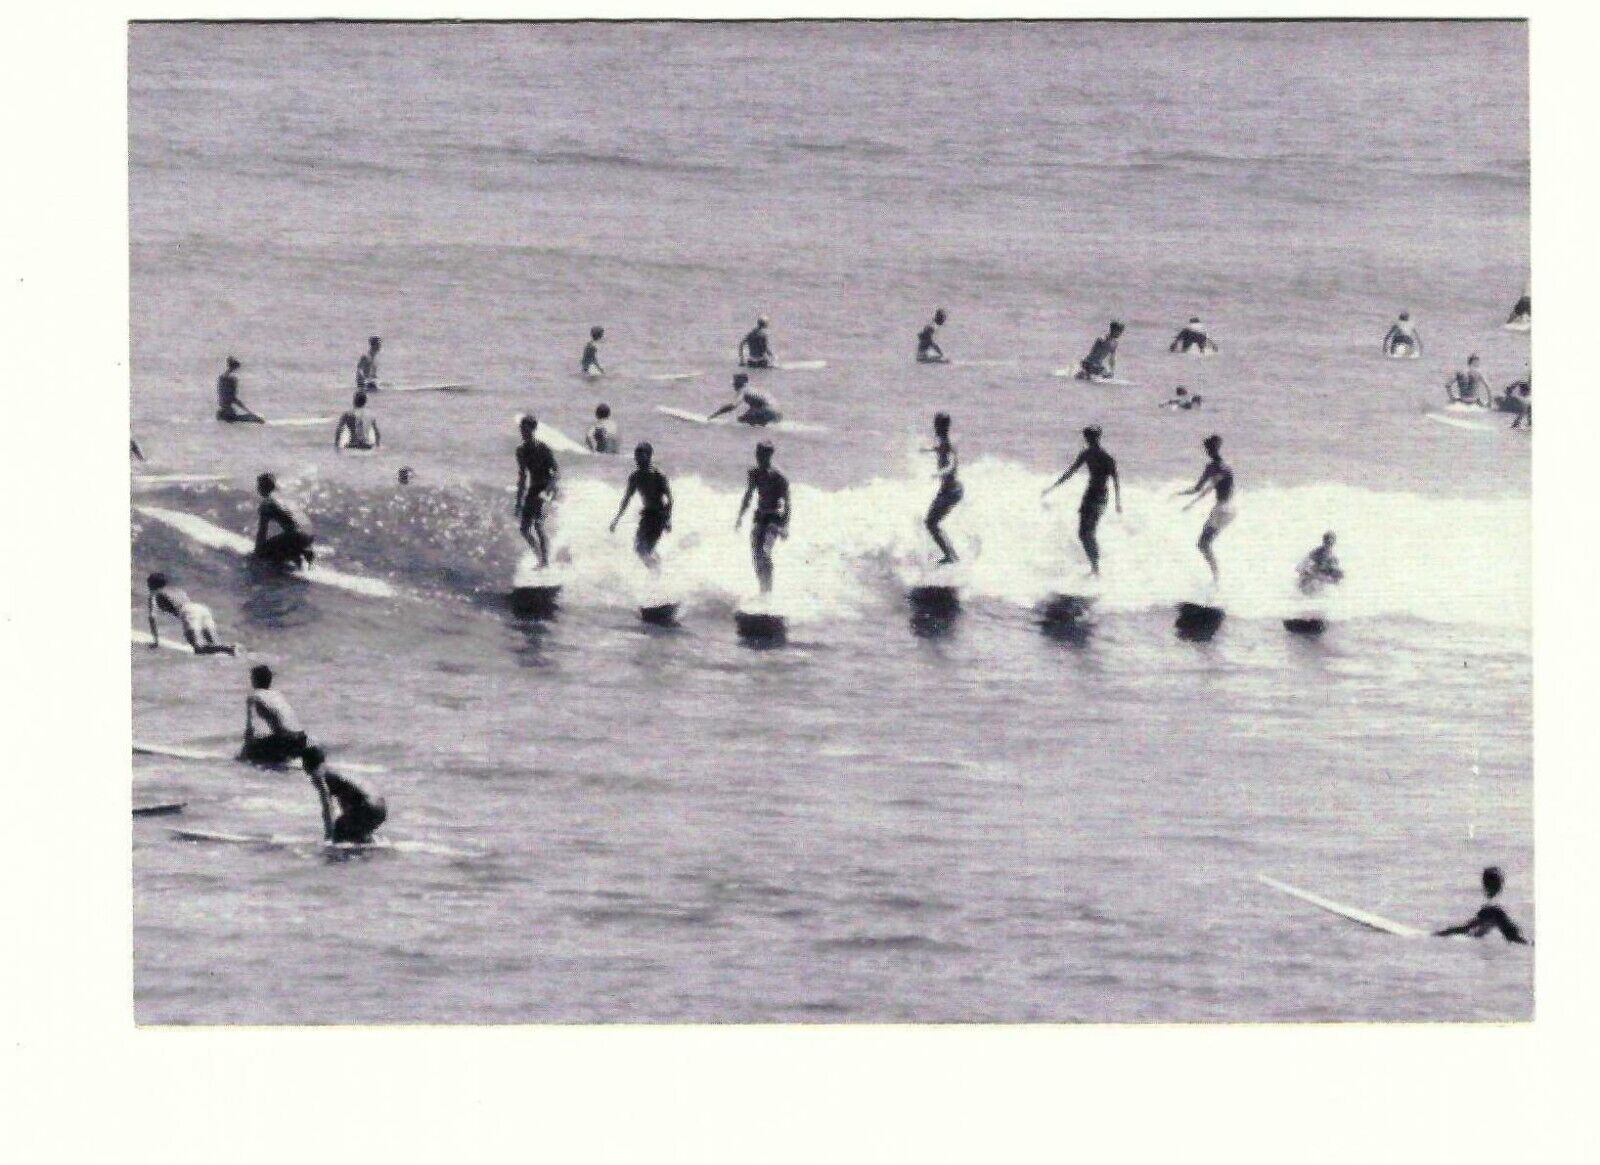 LeRoy Grannis Photo Note Card Malibu 1964 Black and White Vintage Surfing